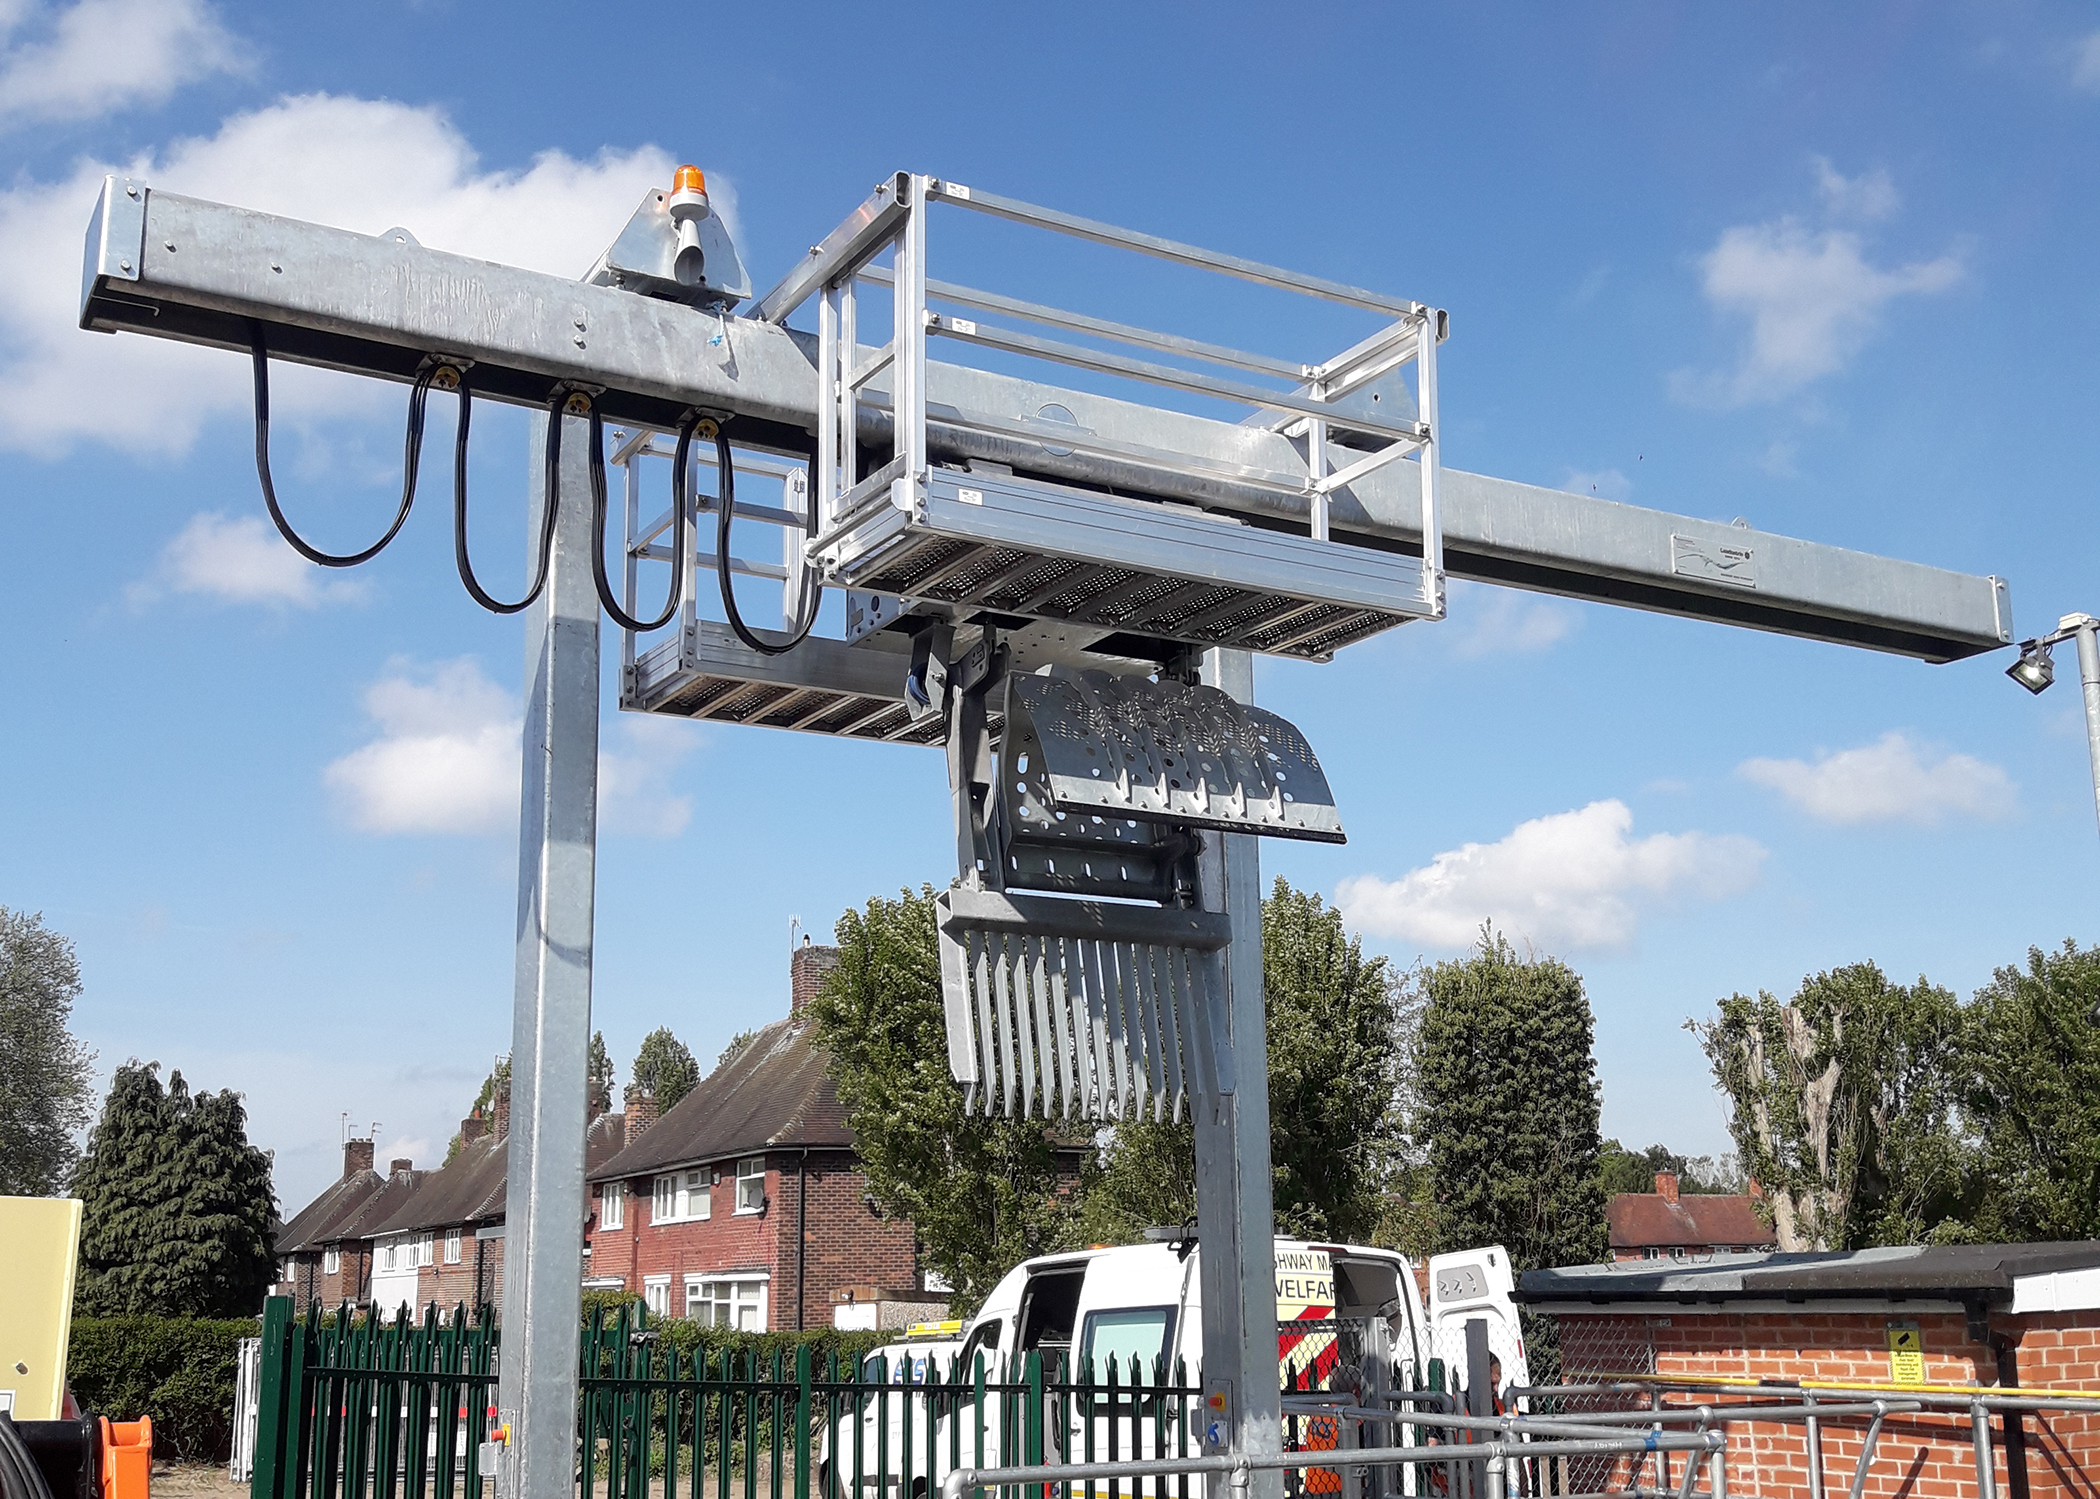 ECS Engineering Services have completed installing a new screen cleaner at Daybrook Watercourse that runs alongside the playing fields of Nottingham High School.